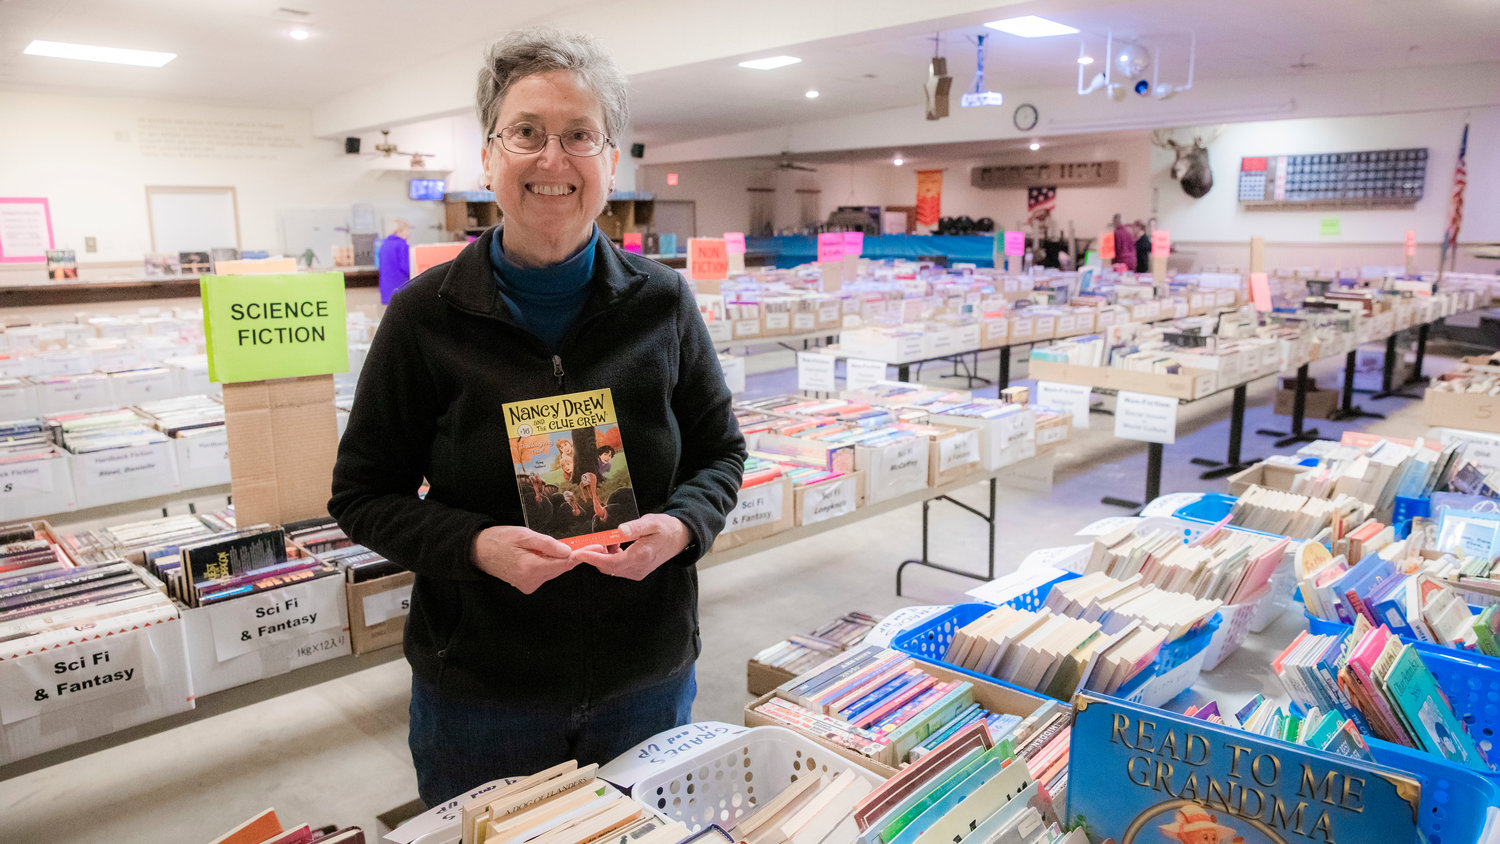 Laura Hewett, a former teacher in the Chehalis School District, smiles and holds up books she would show students on display at the AAUW Used Book Sale at the Moose Lodge in Centralia on Tuesday.